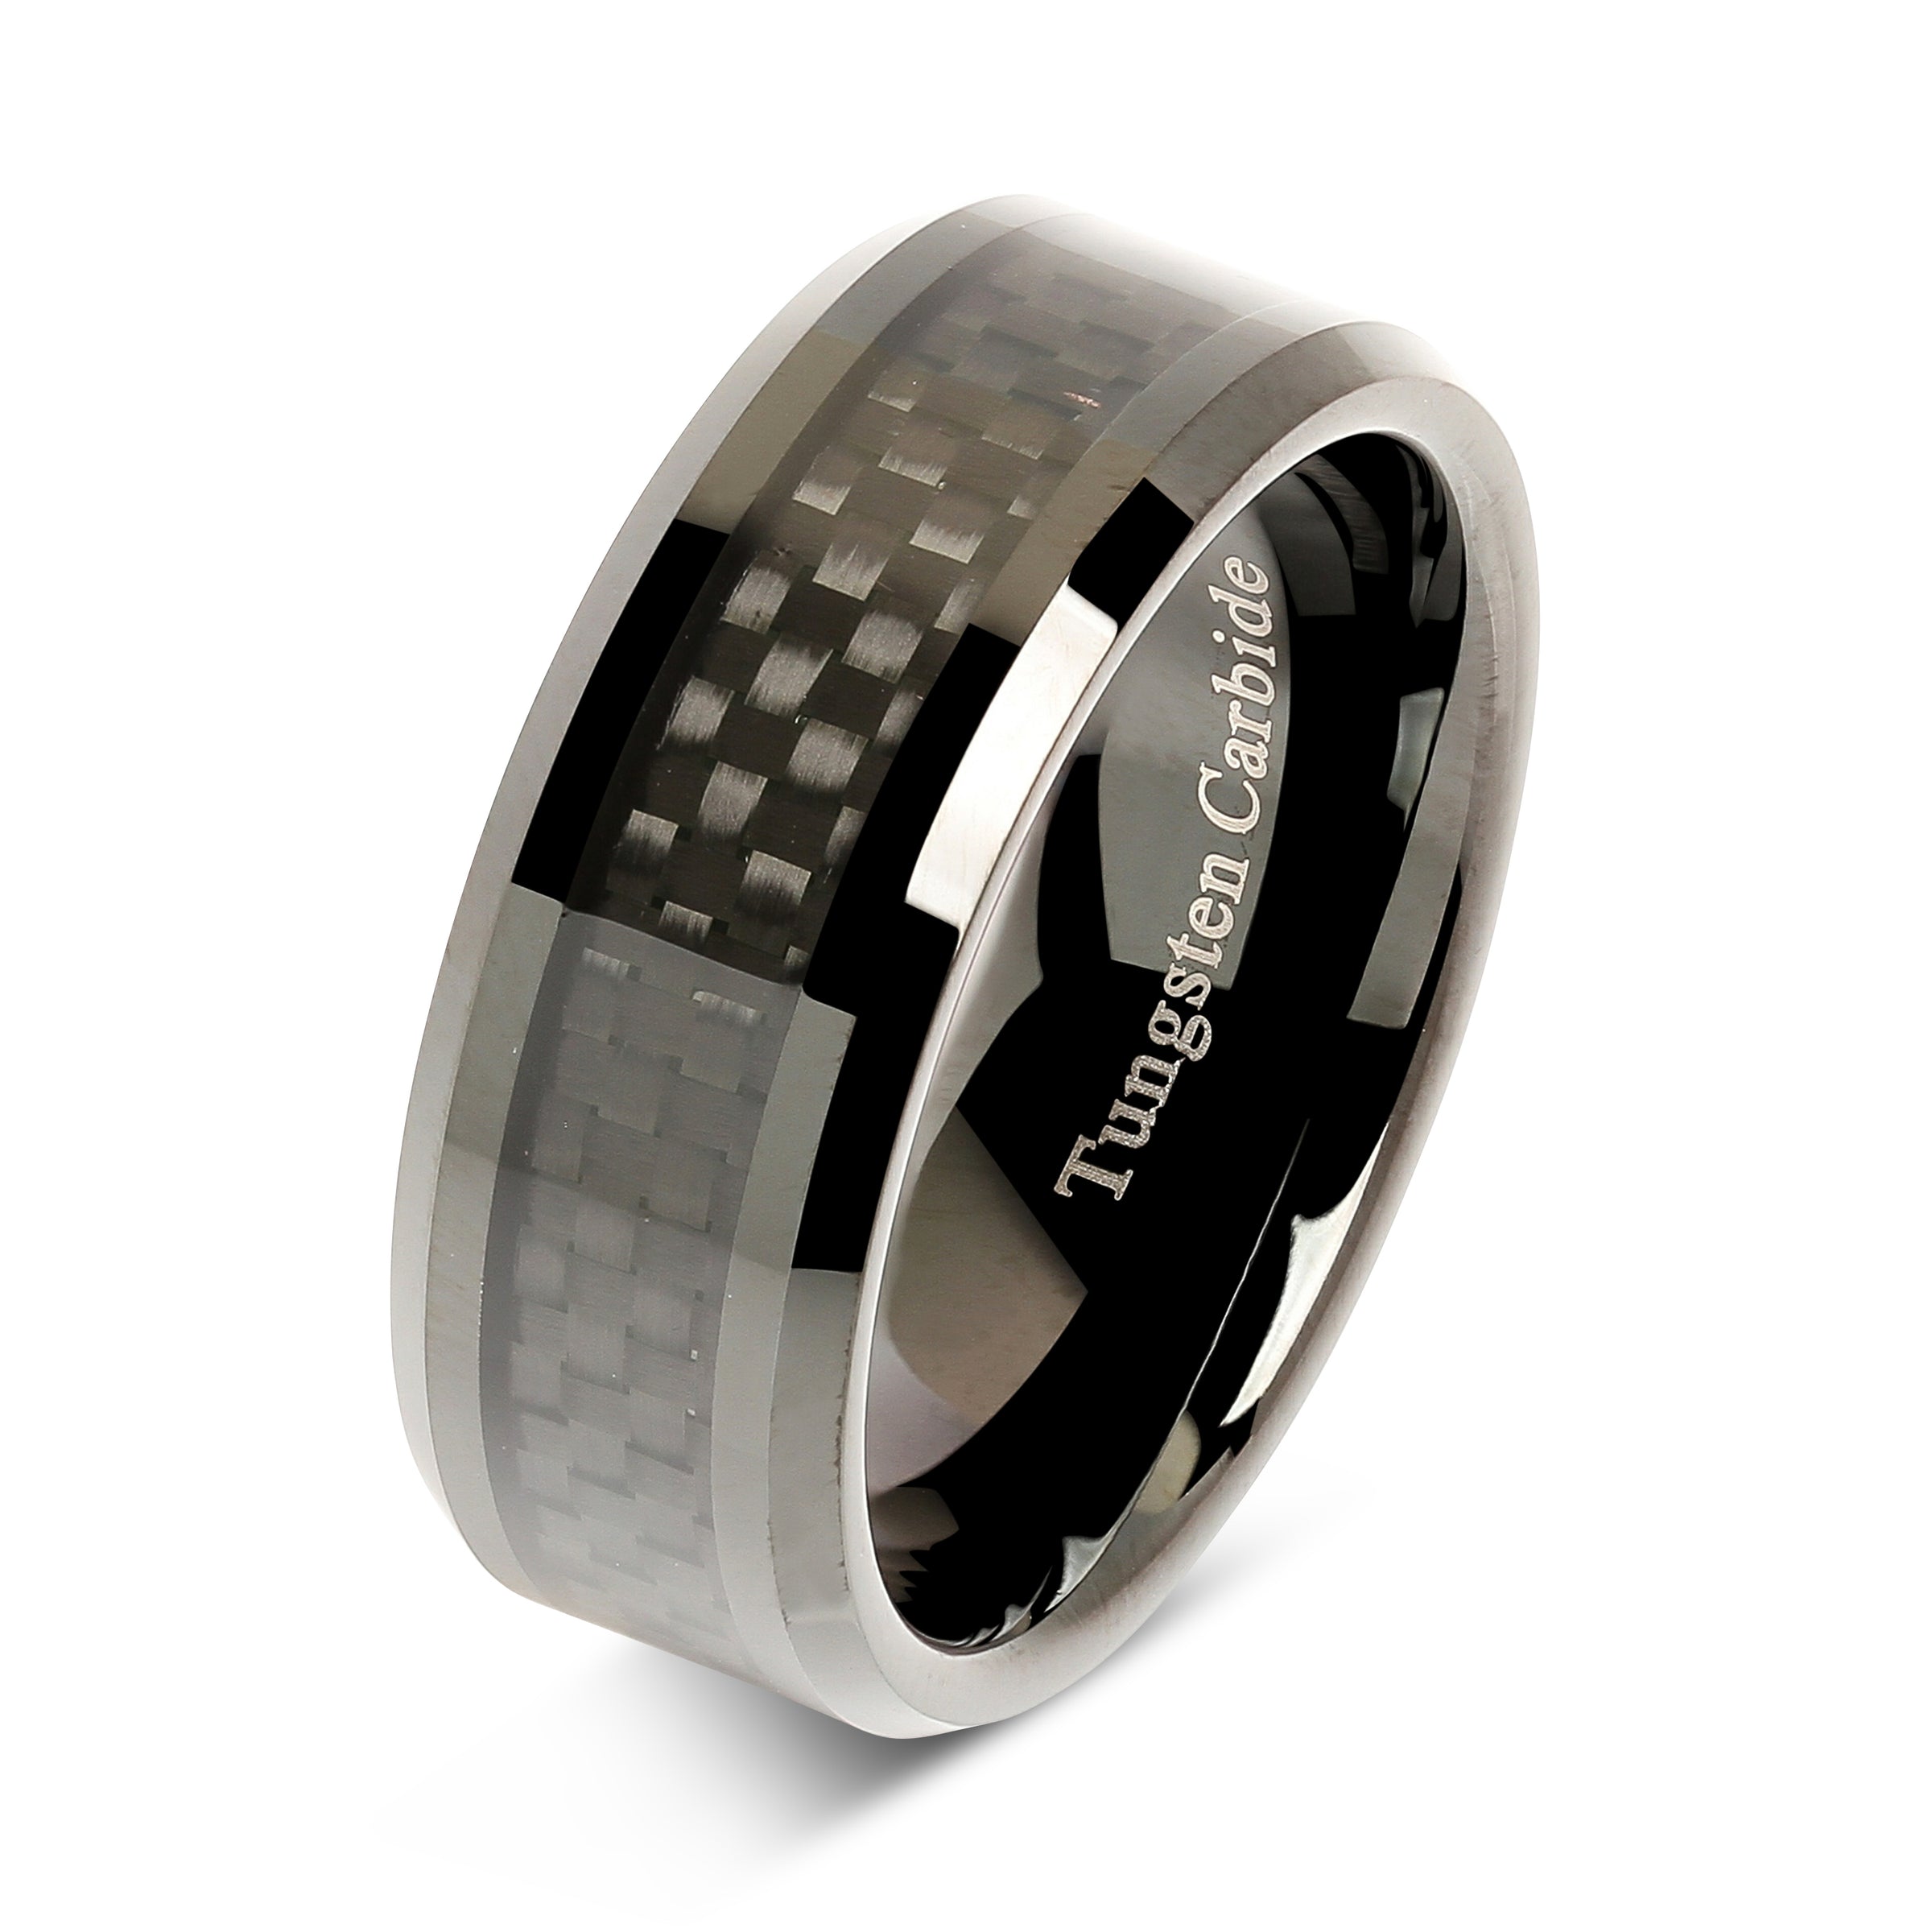 8mm Tungsten Carbide Ring Carbon Fiber Inlay Black Plated Wedding Band